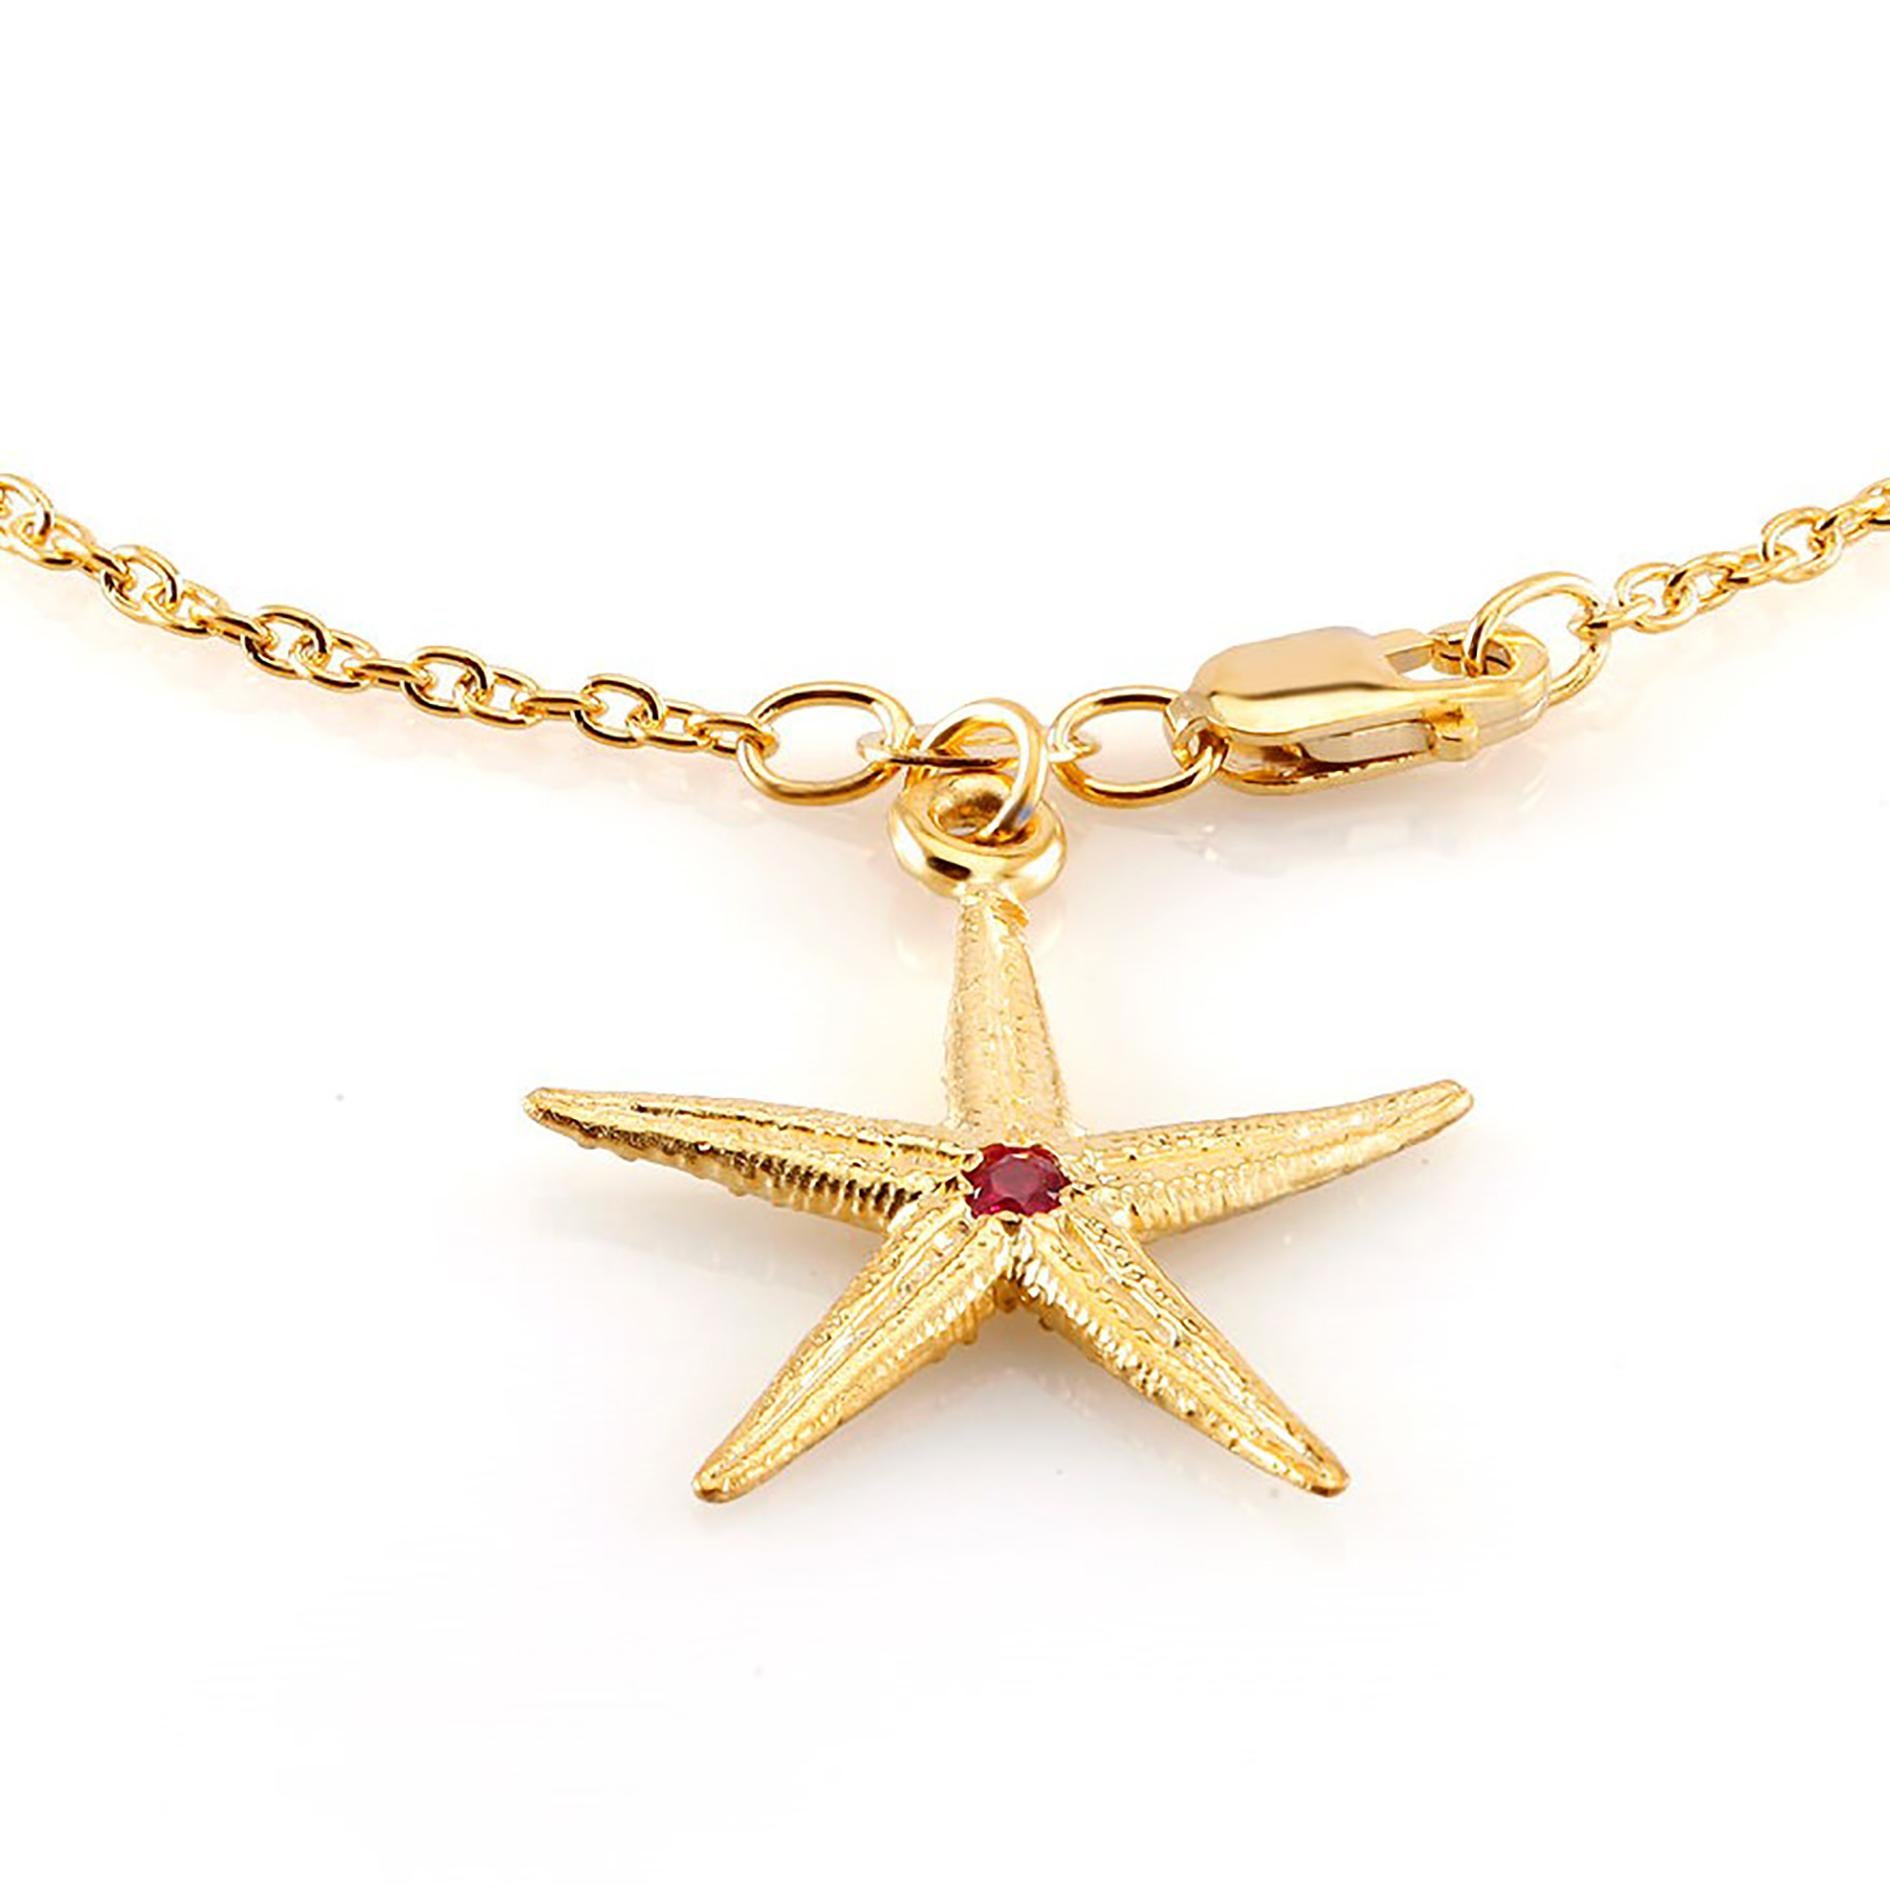 Sterling Silver link bracelet 
Star shape charm measuring one inch
Lobster claw clasp
One ruby weight 0.10 carat 
Bracelet seven inch long 
New bracelet
Yellow gold plated 
